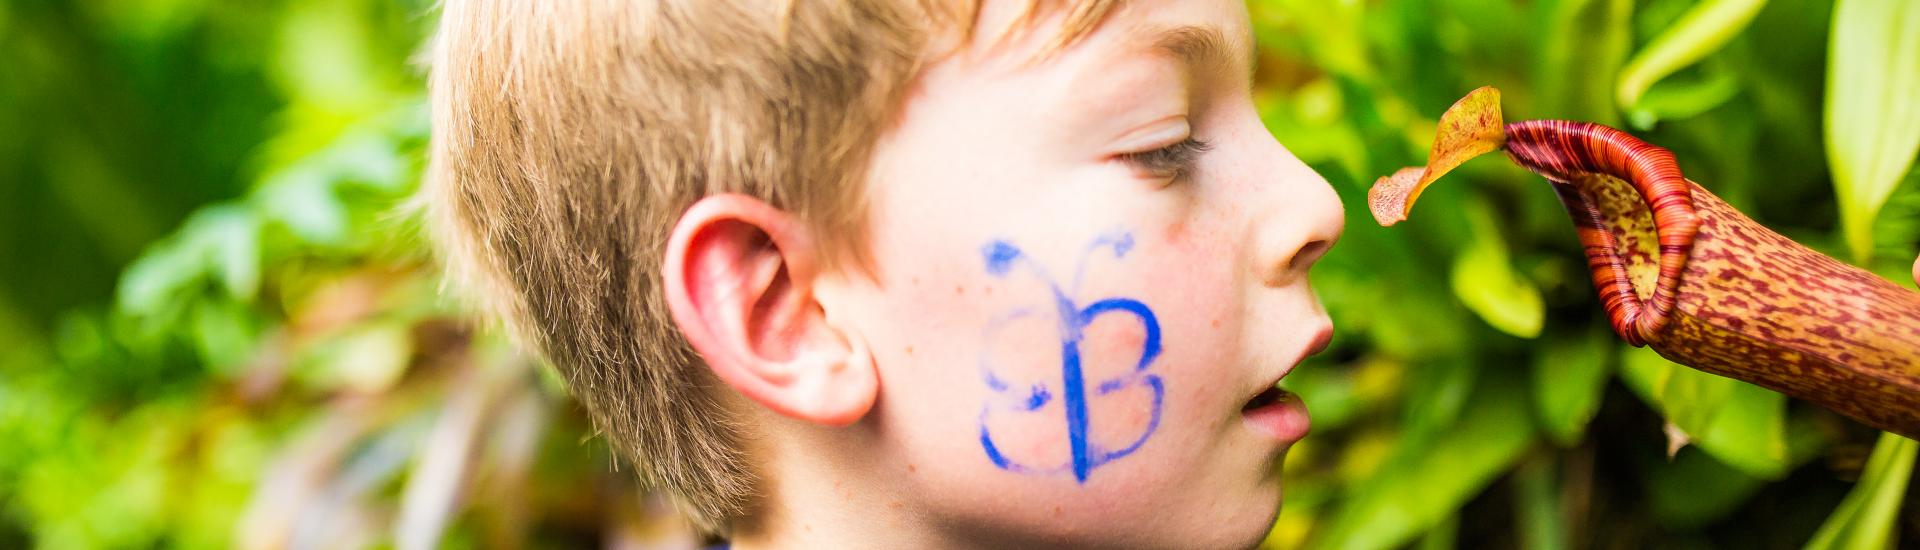 A close up of a young boy with butterfly face paint looking closely at a plant 